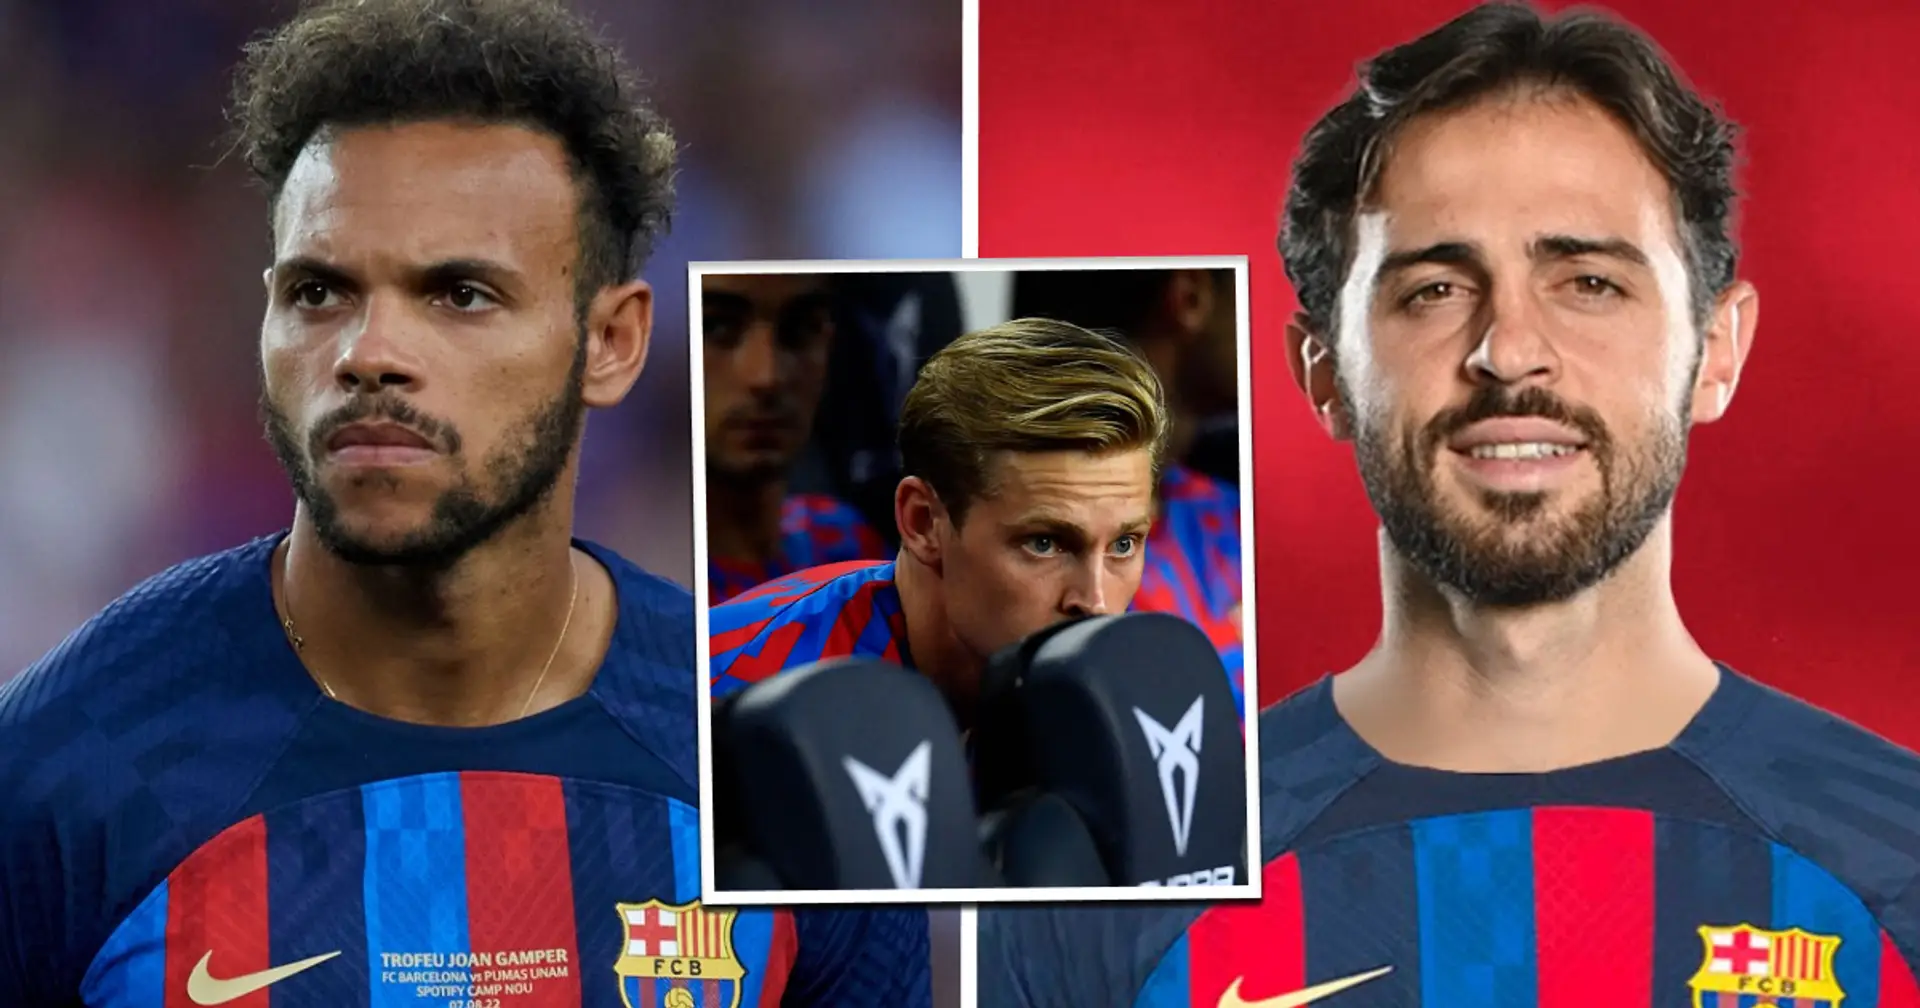 Transfer window enters final crazy weeks: 6 players expected to leave Barca, 3 to arrive